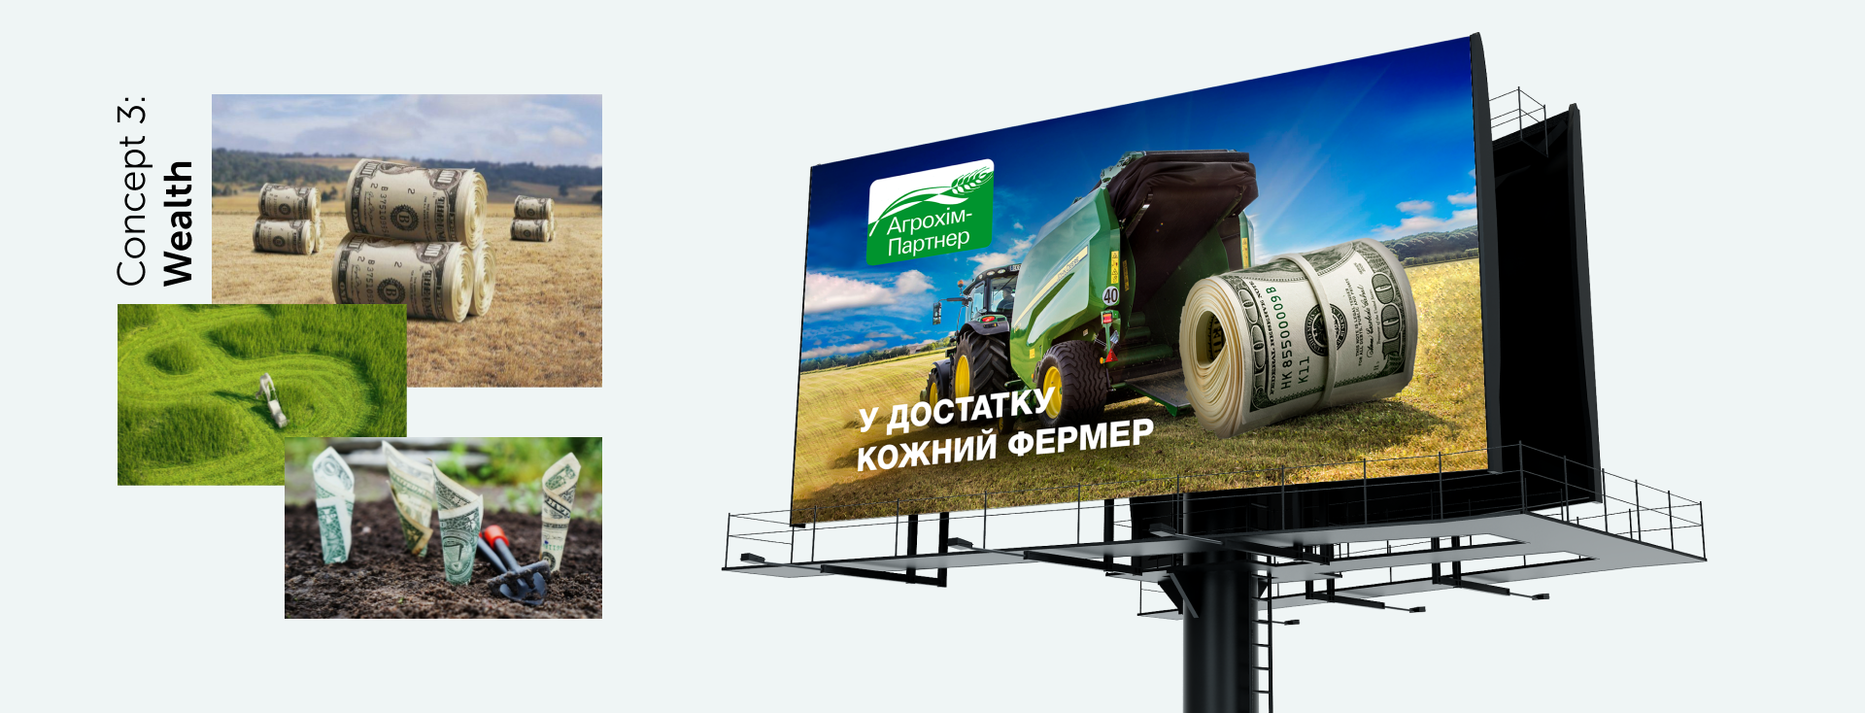 Rebranding of the agricultural company “Agrokhim-Partner”: communication strategy, logo, pattern, corporate style, and website — Rubarb - Image - 4